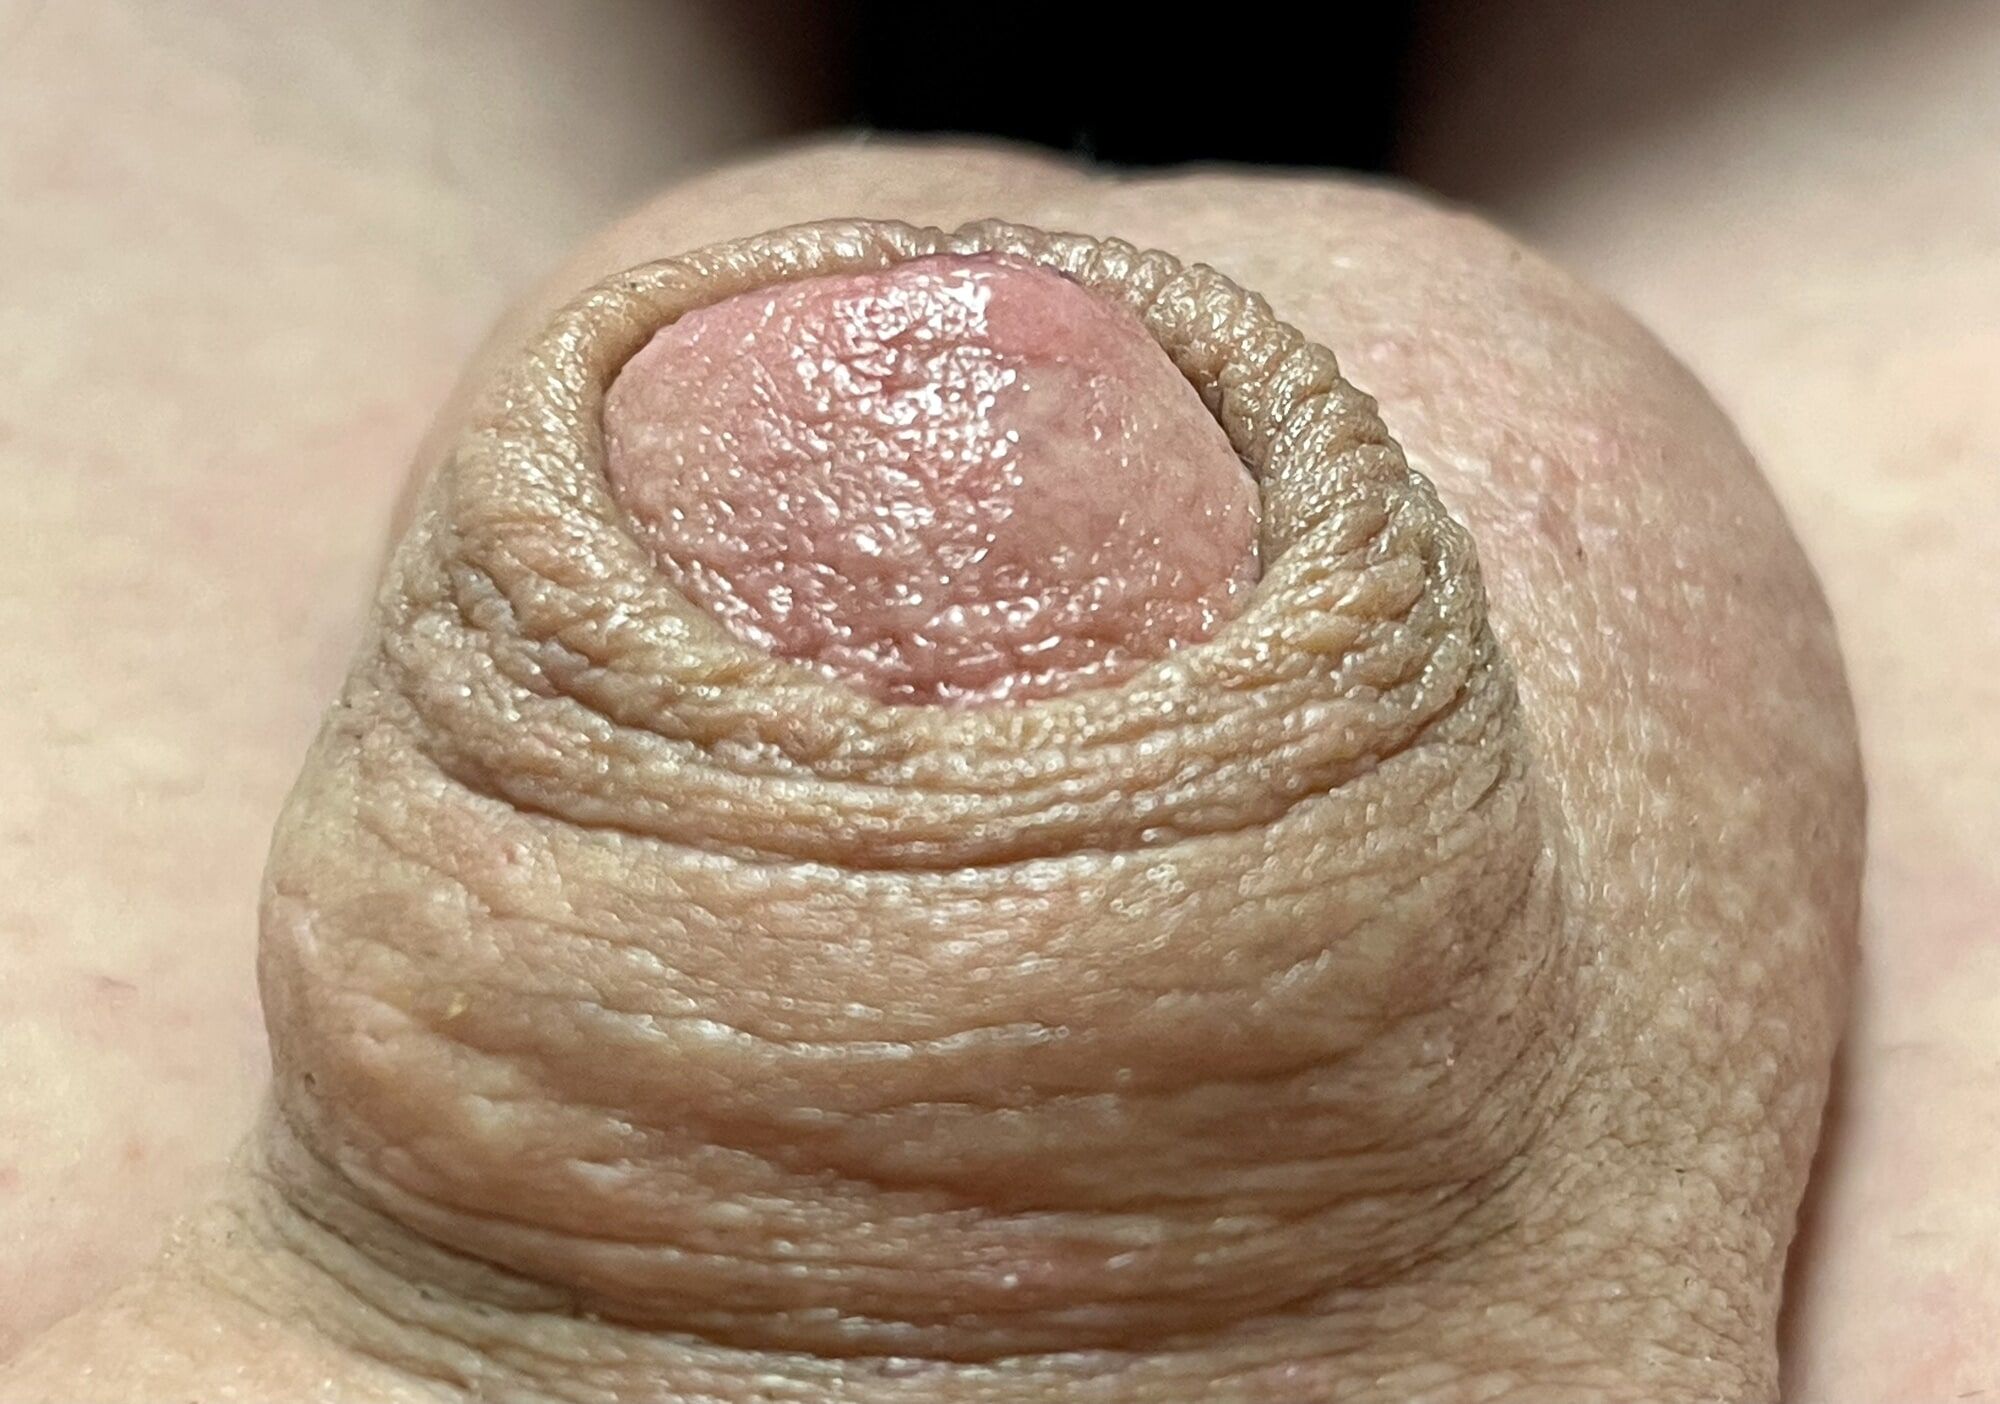 Micropenis close up